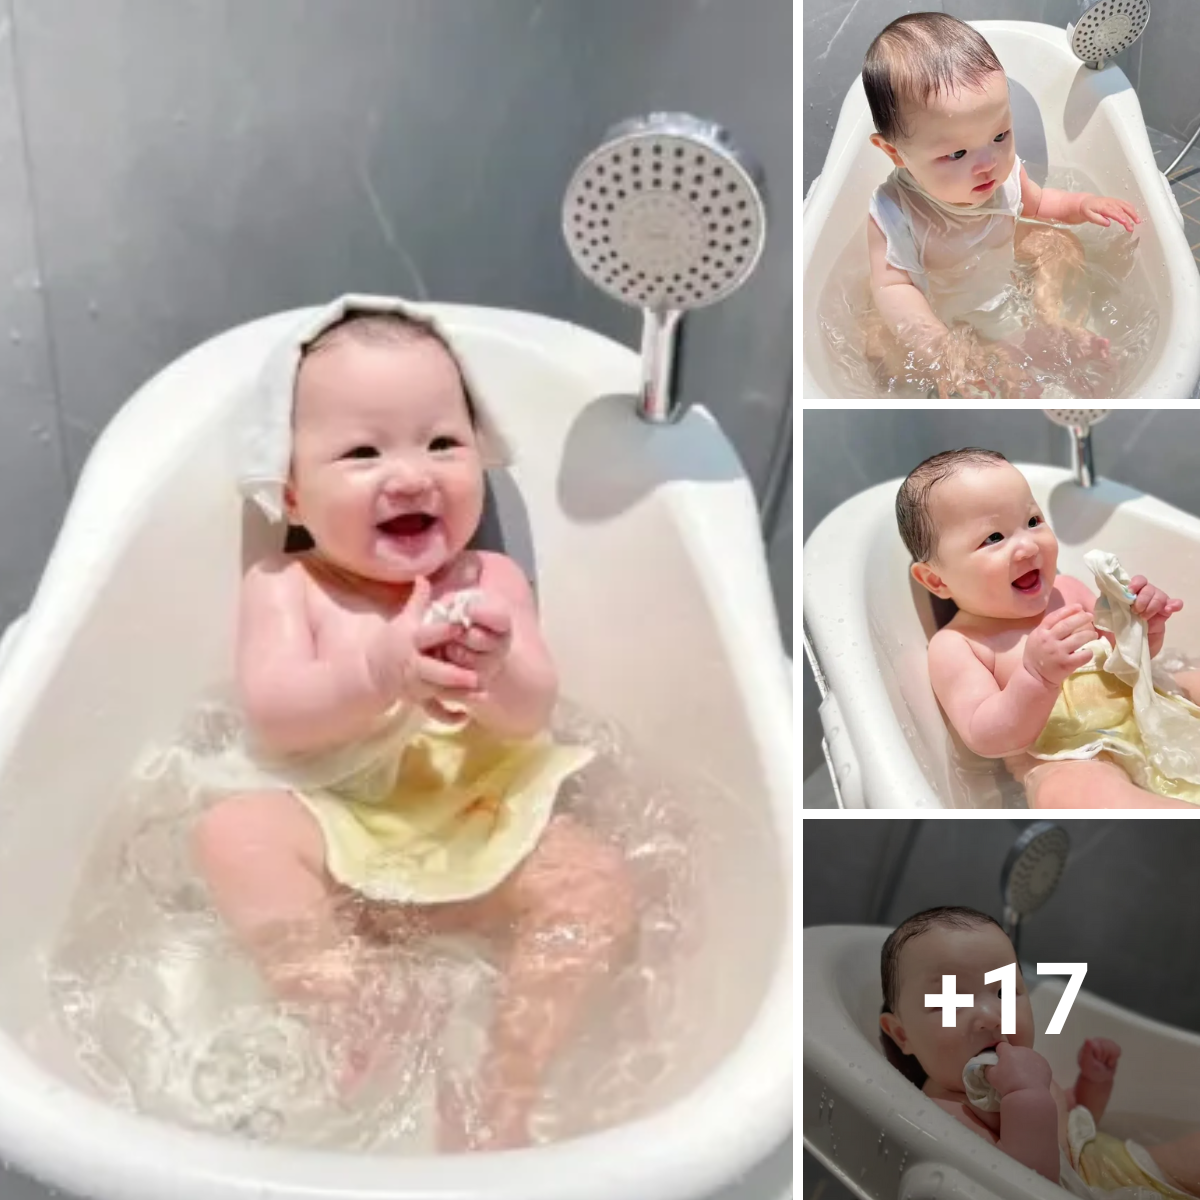 Watch these hilarious and endearing videos of babies having fun in the bathroom with water.